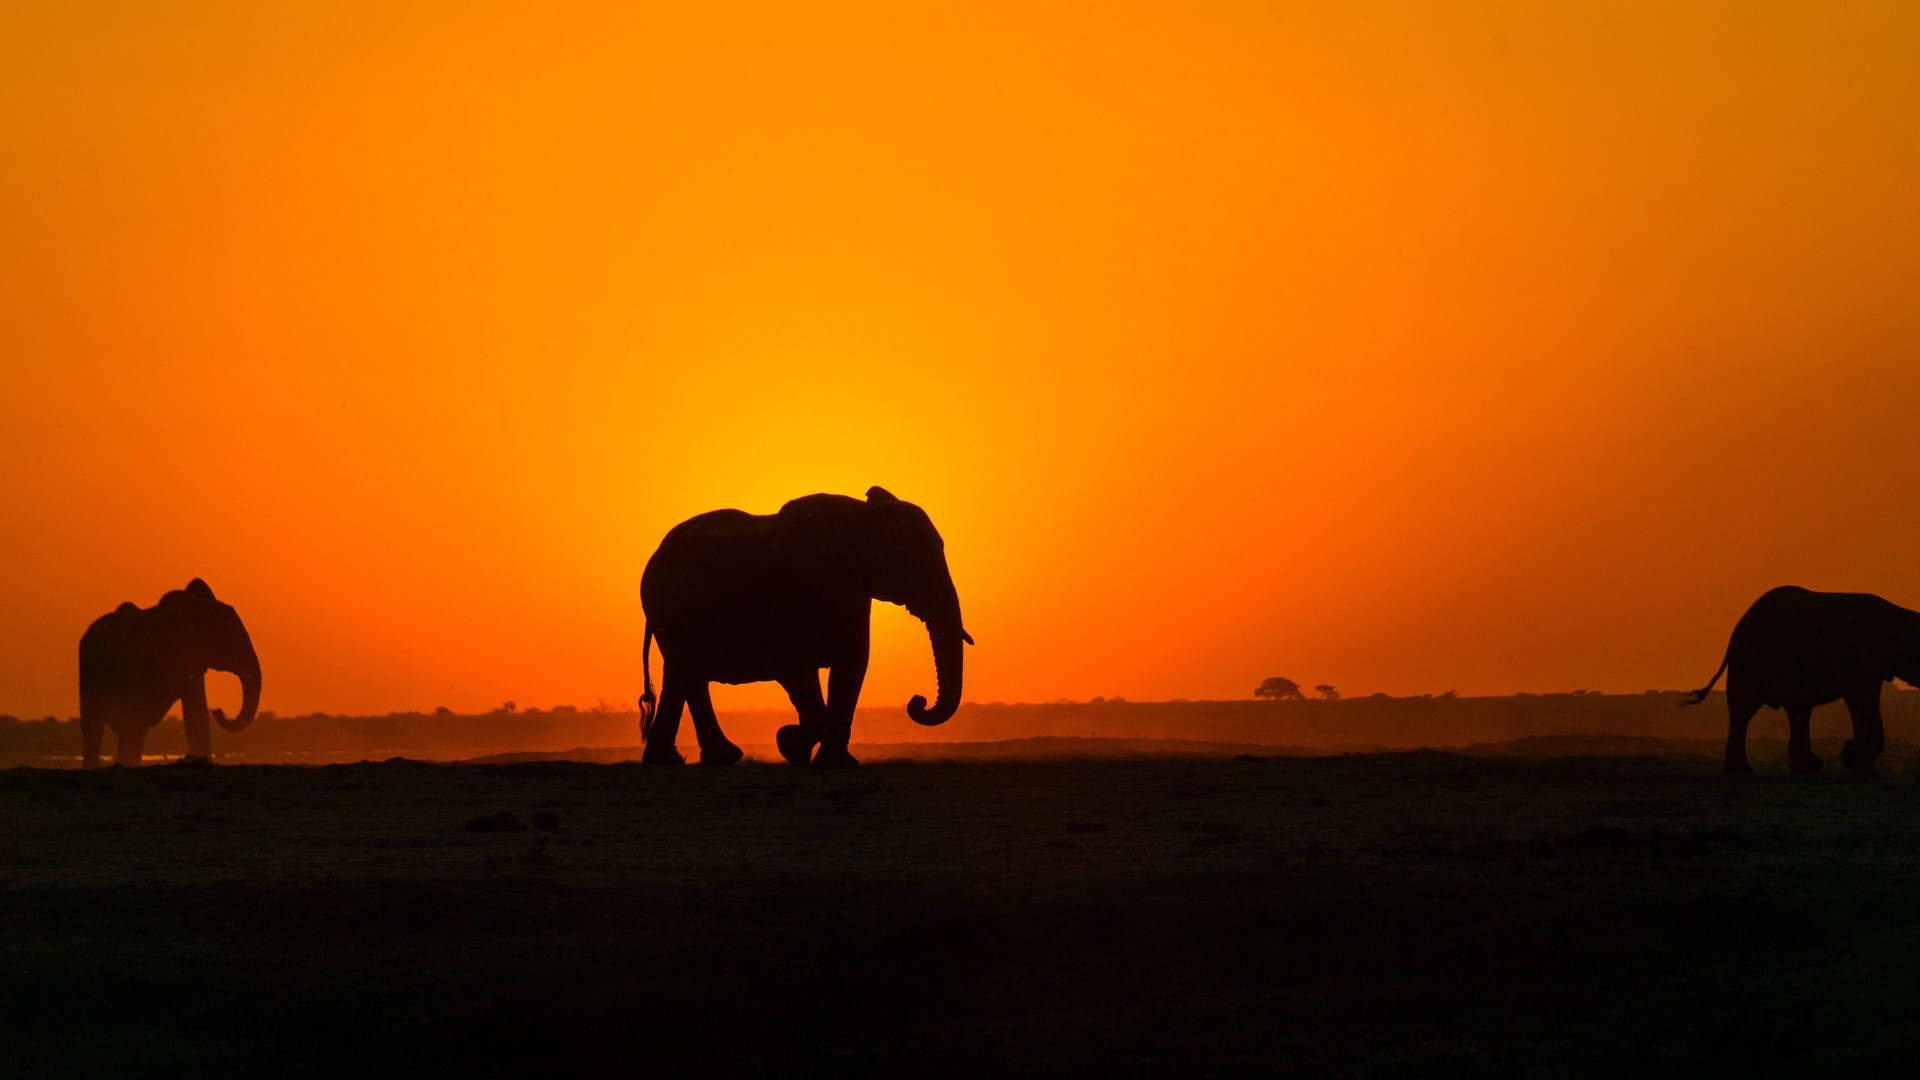 Free Elephant Wallpaper Downloads, [300+] Elephant Wallpapers for FREE |  